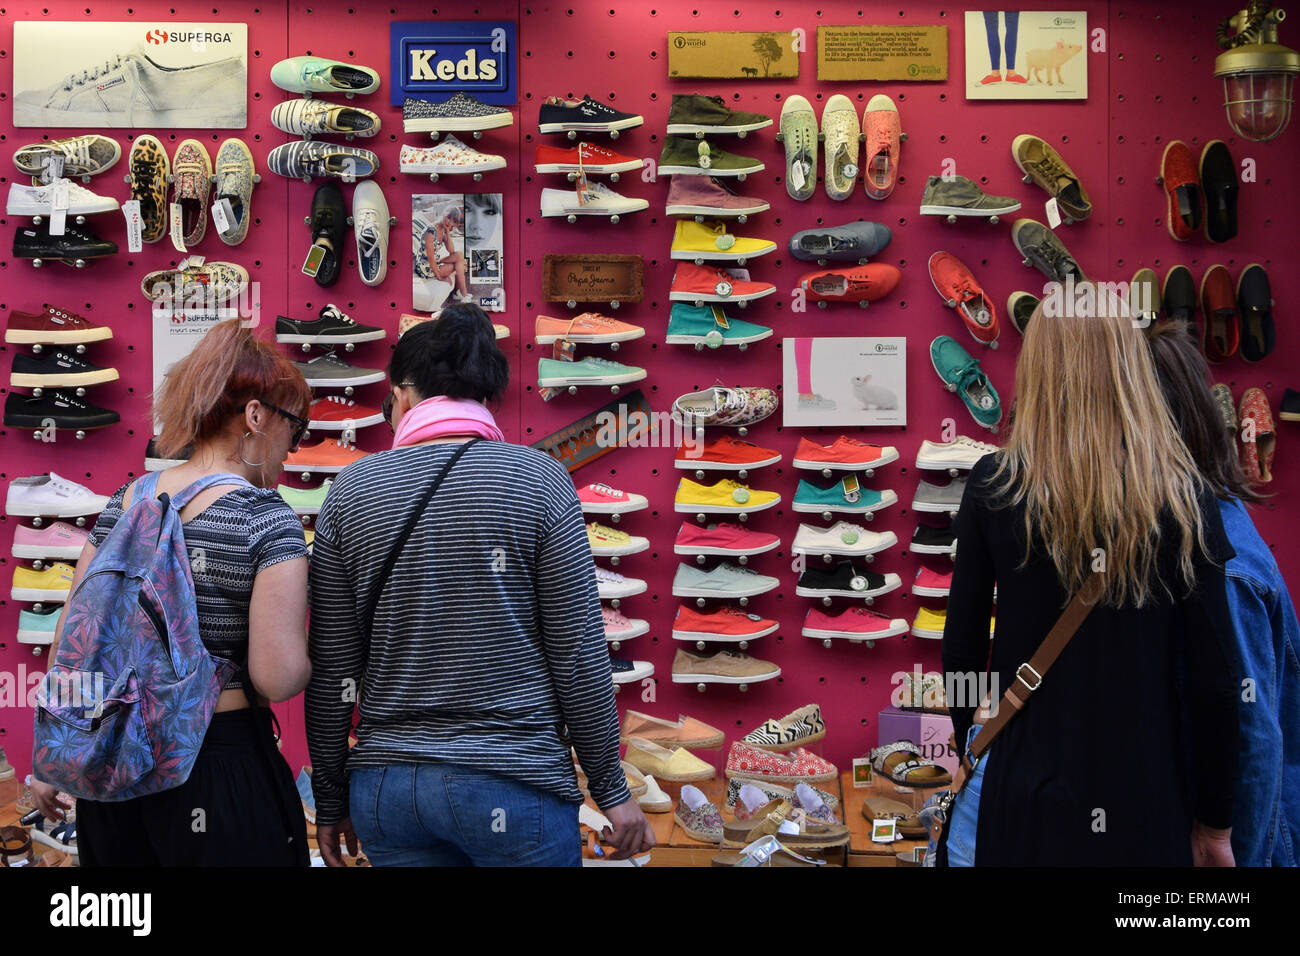 Women looking at storefront with casual shoes and footwear. Stock Photo